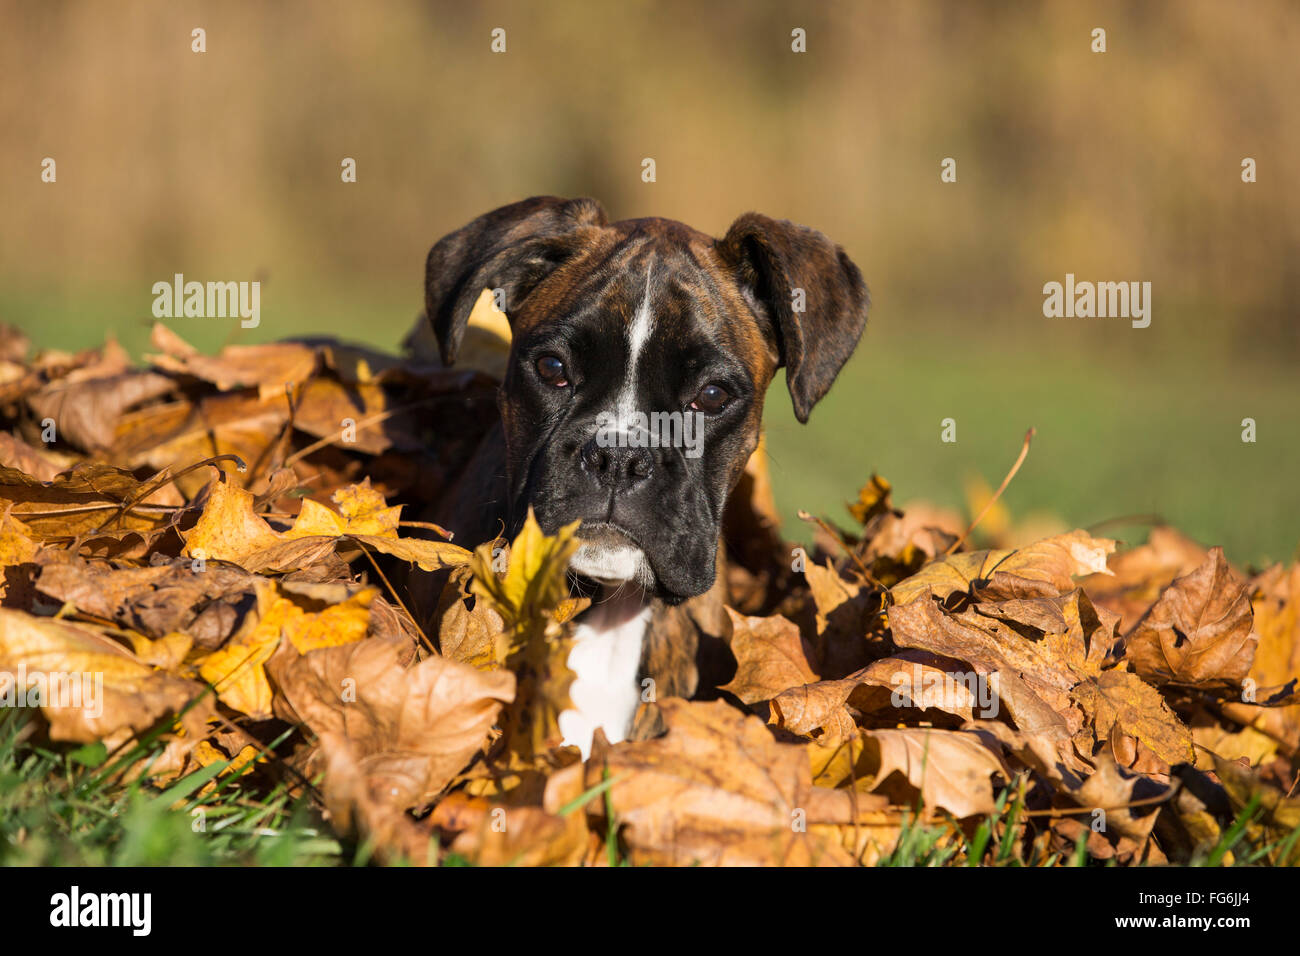 Boxer puppy lying in autumn leaves Stock Photo